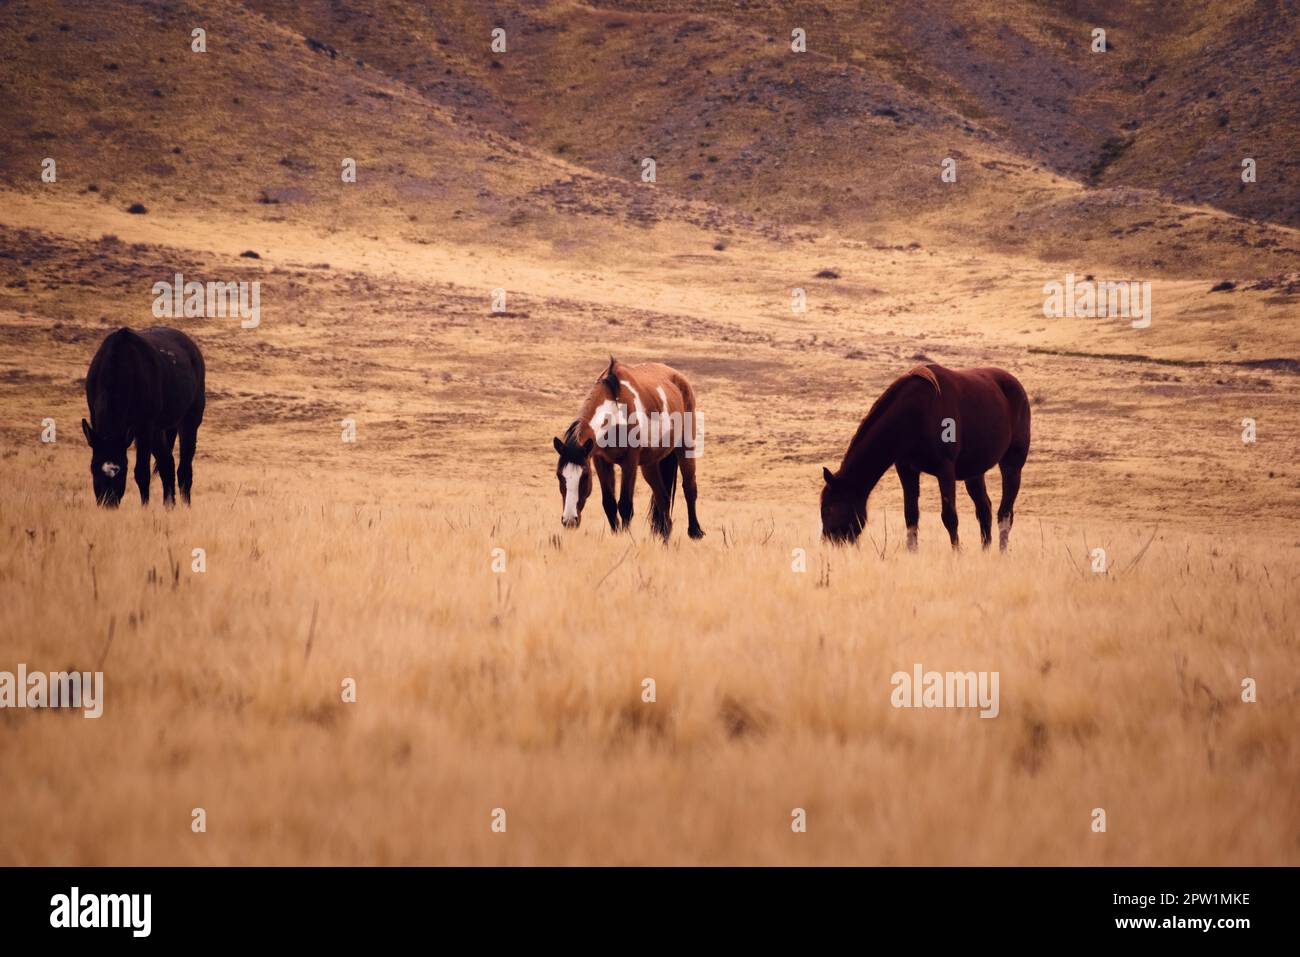 Horses grazing in a dry grassland in Valle de Uco, Mendoza, Argentina, in a dark cloudy day. Stock Photo